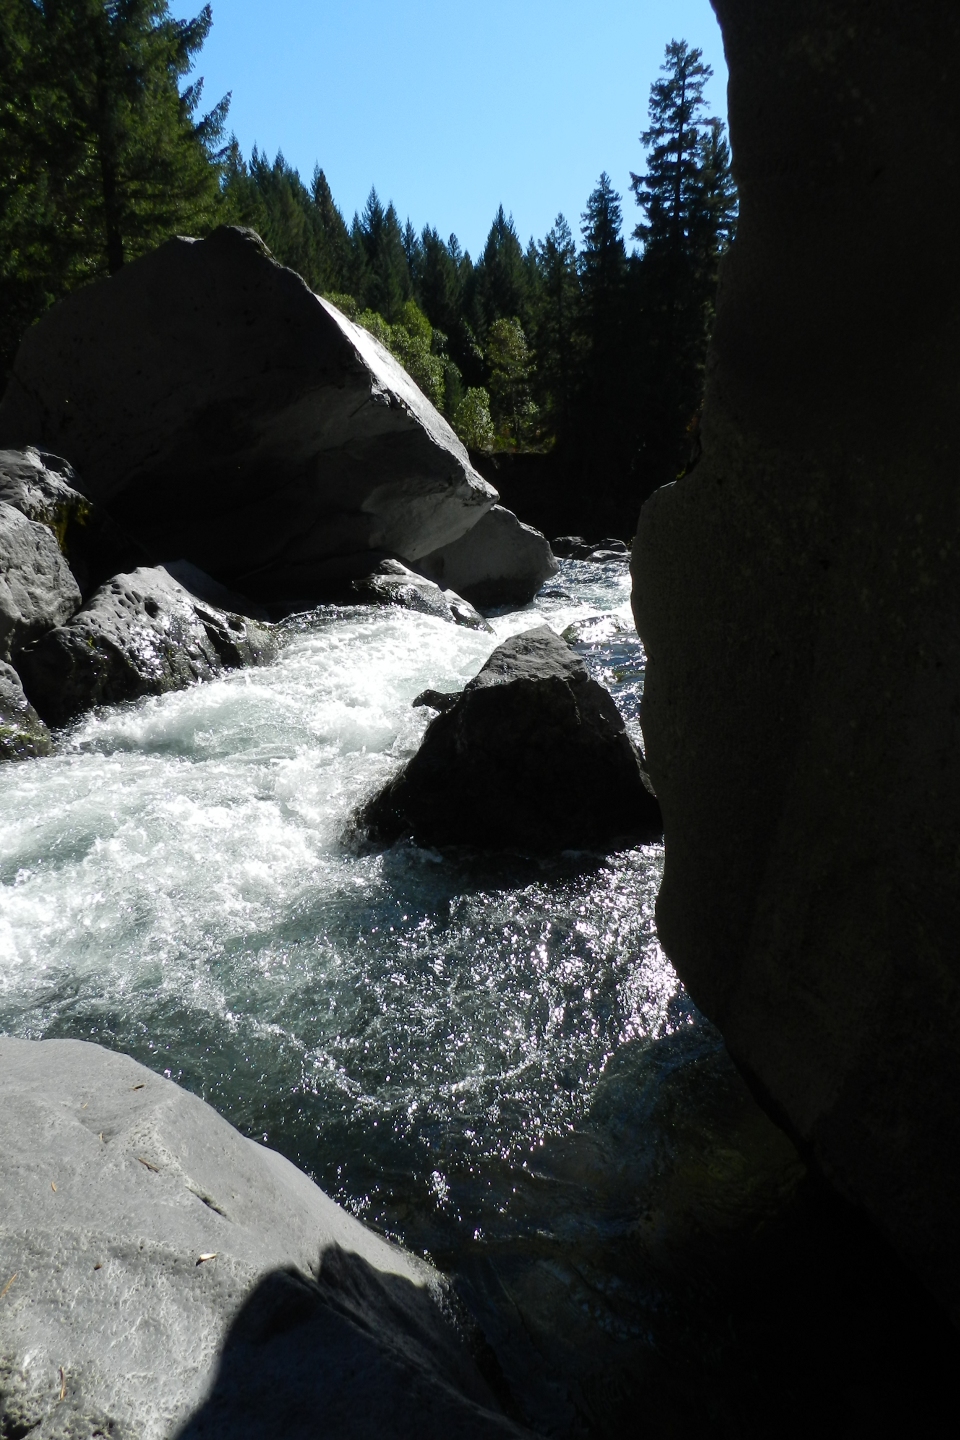 River through the boulders